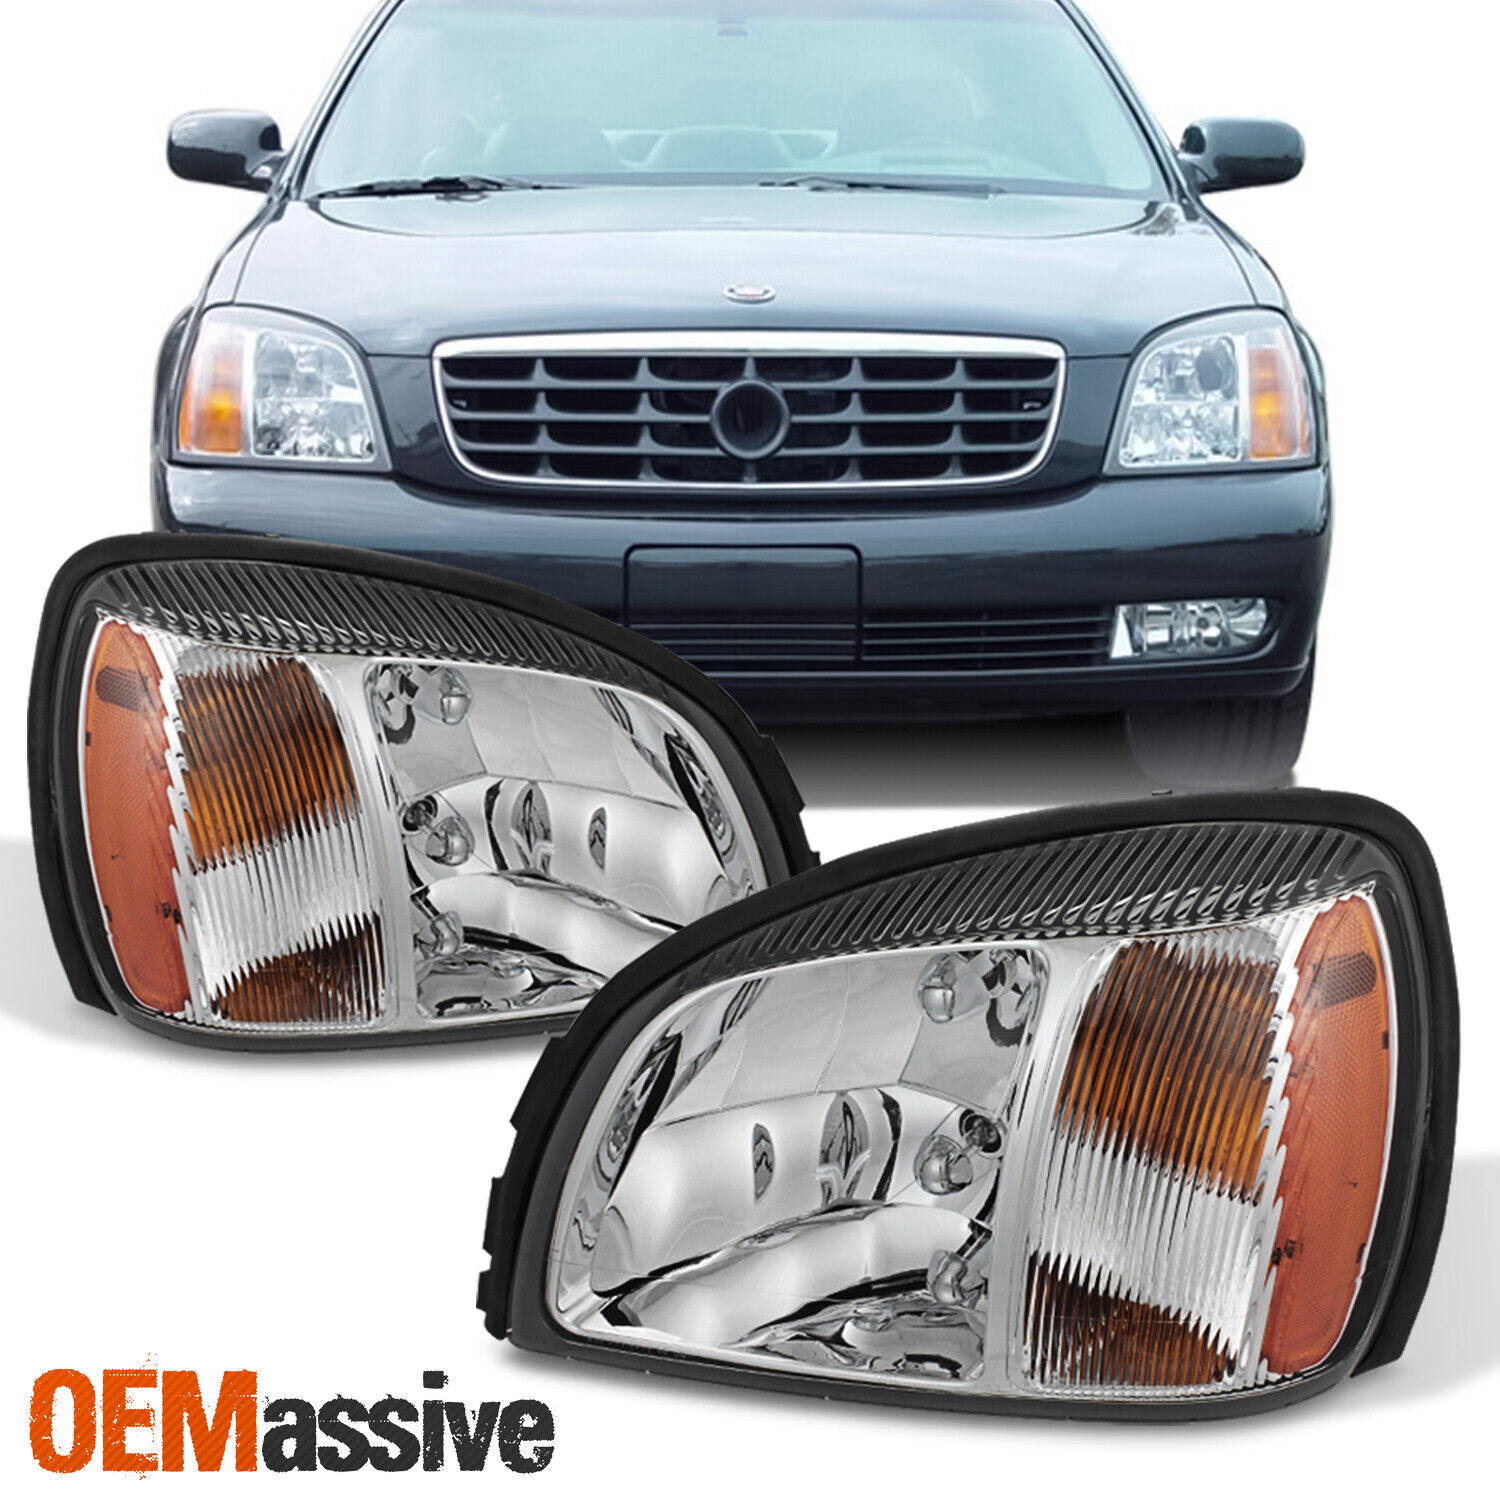 For 2000-2005 Cadillac Deville OE Style Headlights Left+Right Pair w/ Amber Side